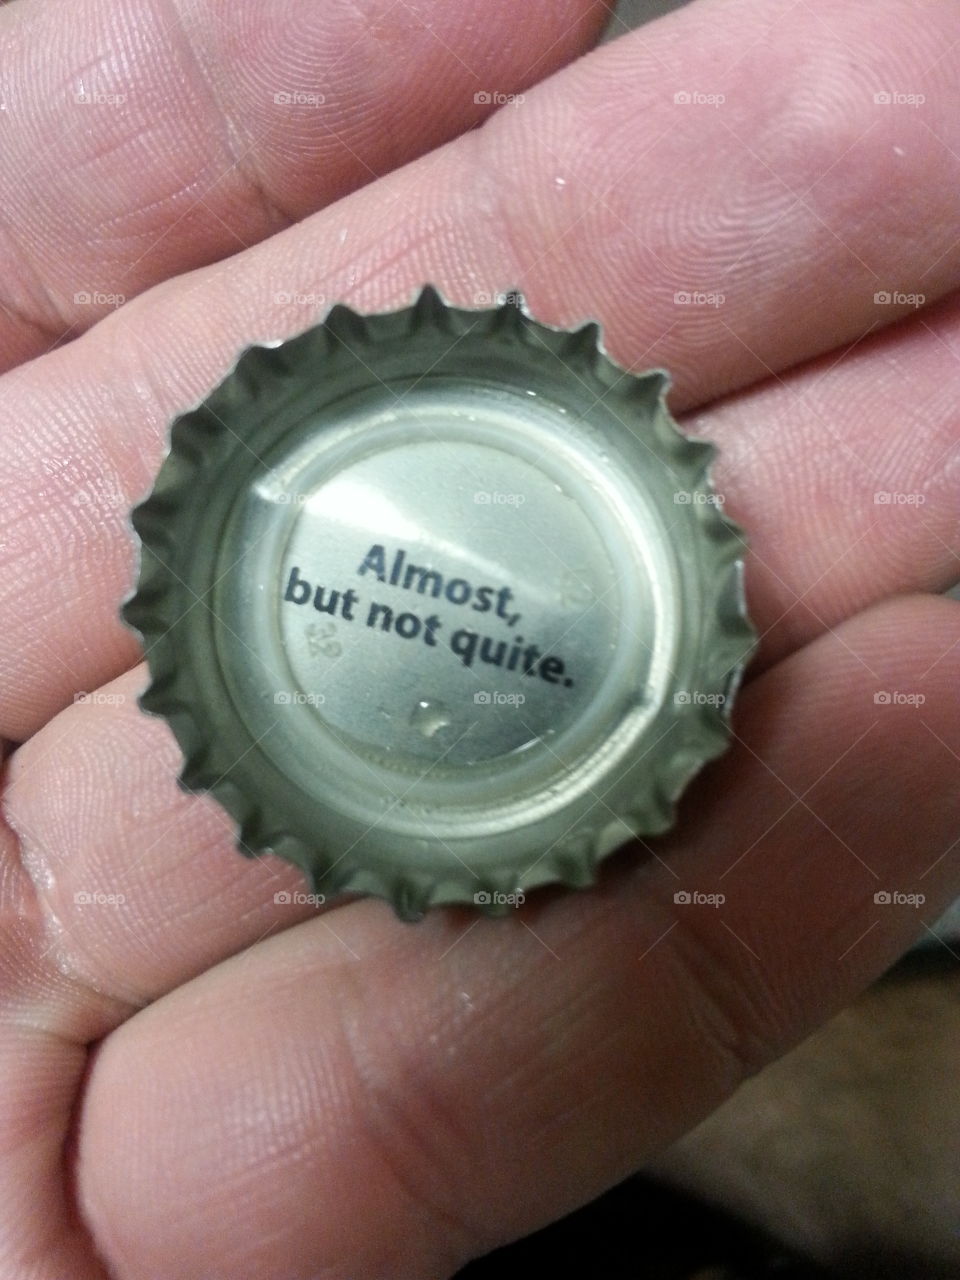 almost, but not quite. magic hat brewery number 9 beer bottle cap